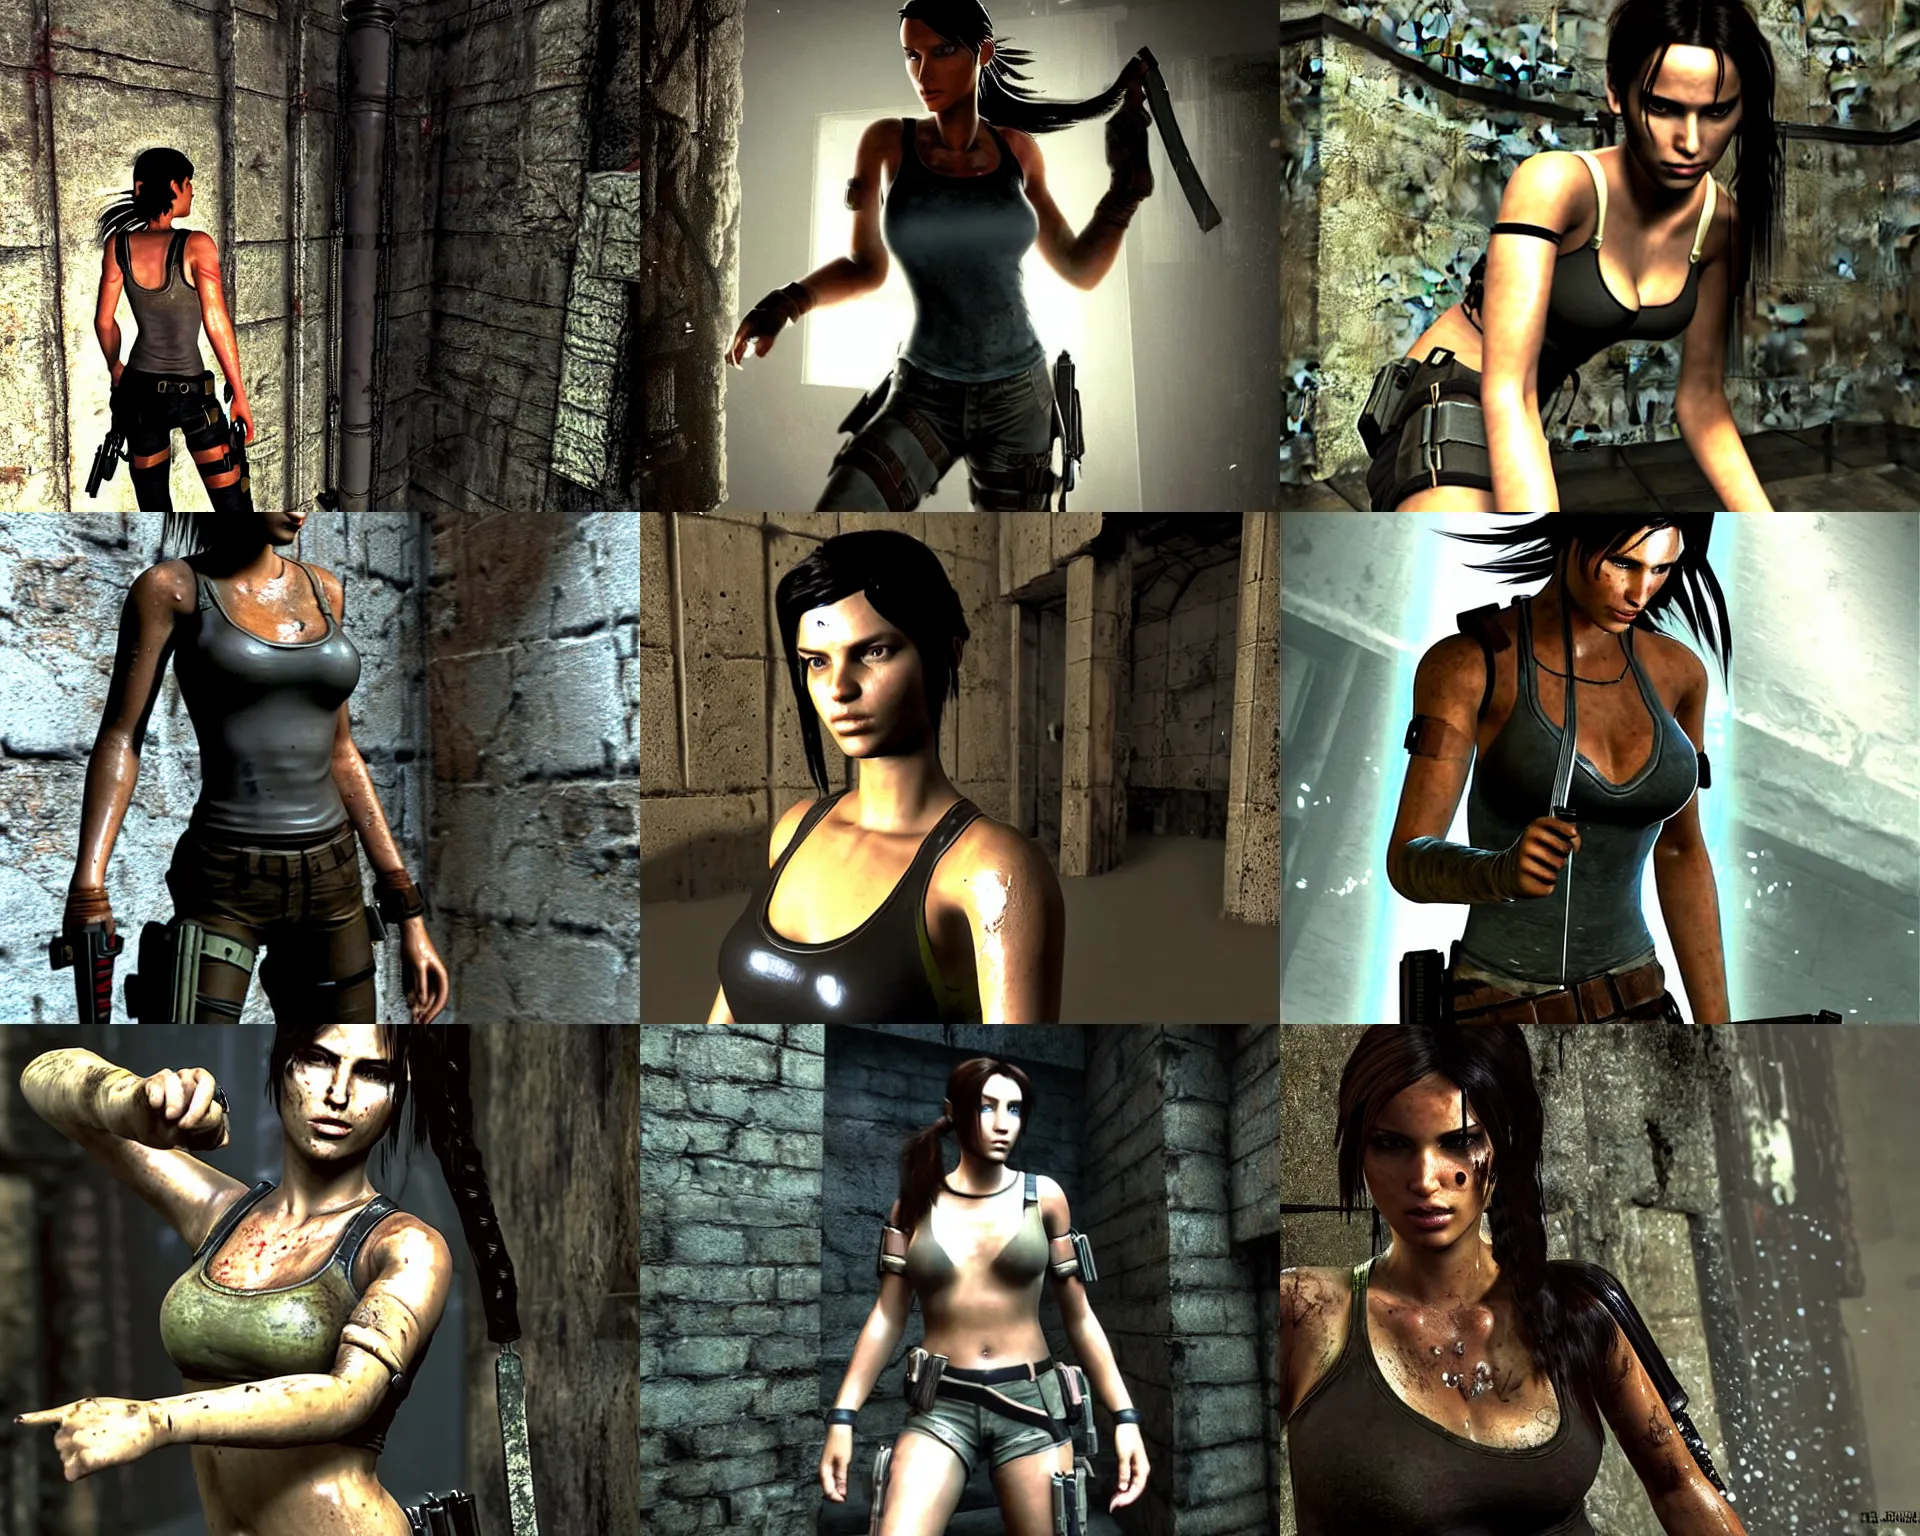 New Tomb Raider Game Could Have Very Different Vibe